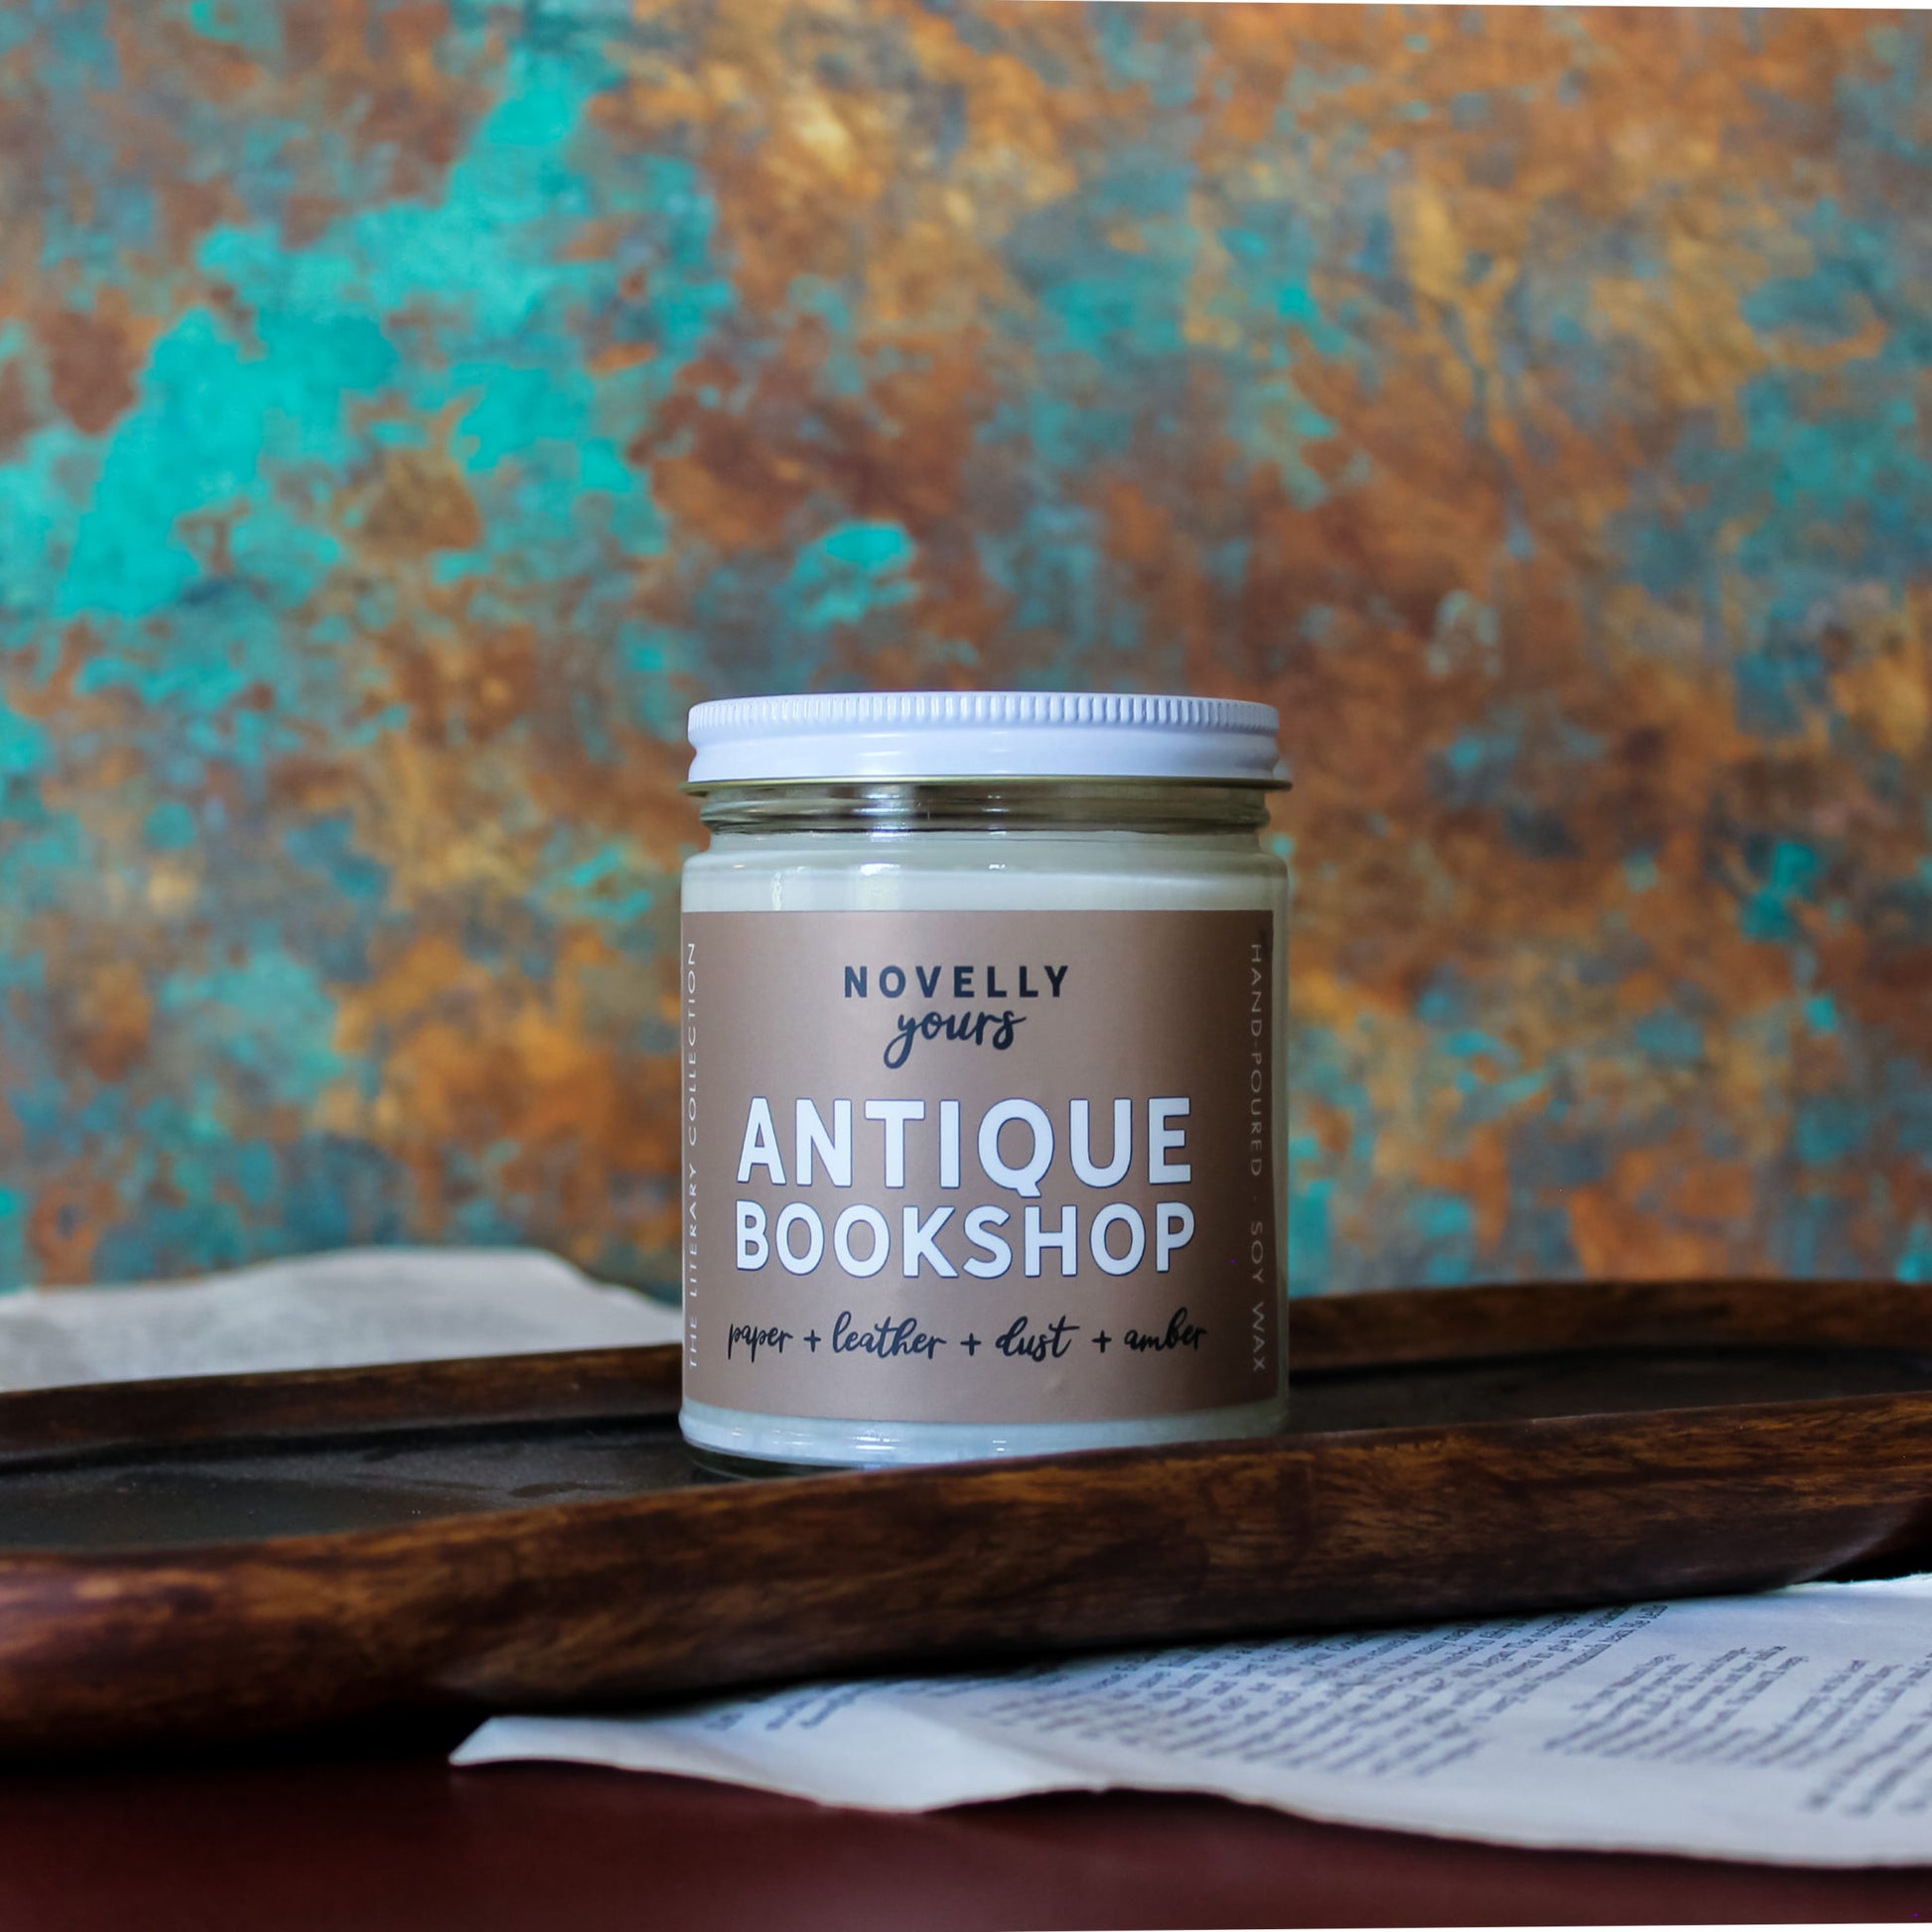 book inspired candle "Antique Bookshop" with beige label sits in front of rustic background surrounded by book pages